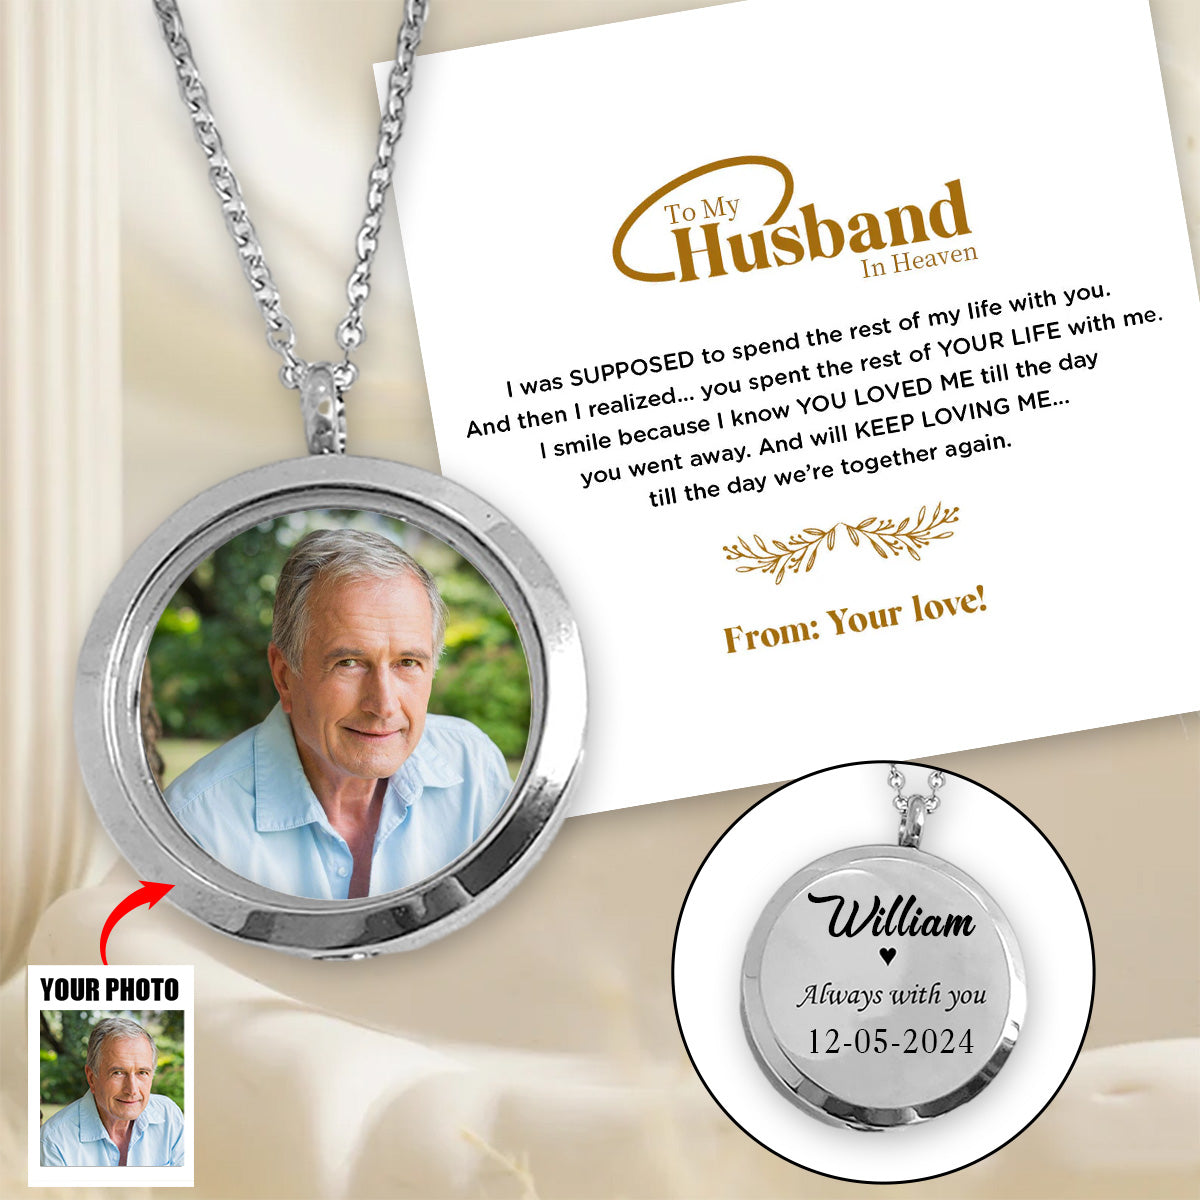 Always with you - Personalized Locket Necklace With Photo